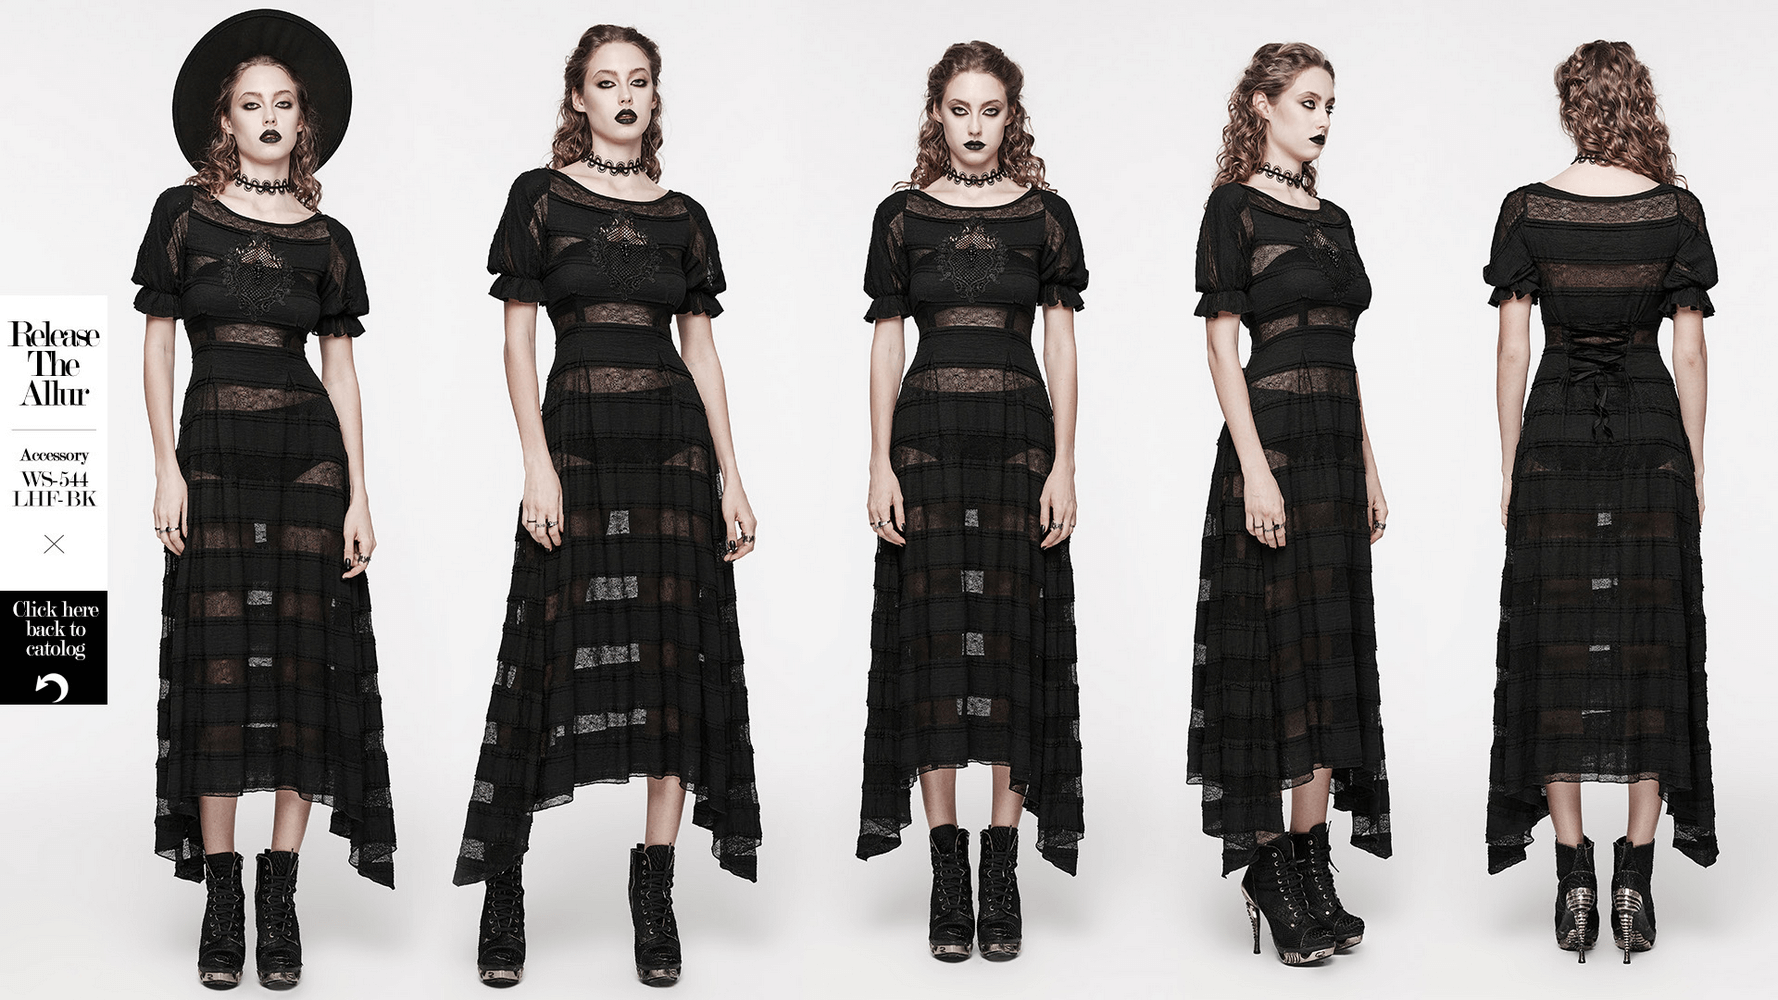 Ethereal Short Sleeves Lace High-Low Gothic Dress